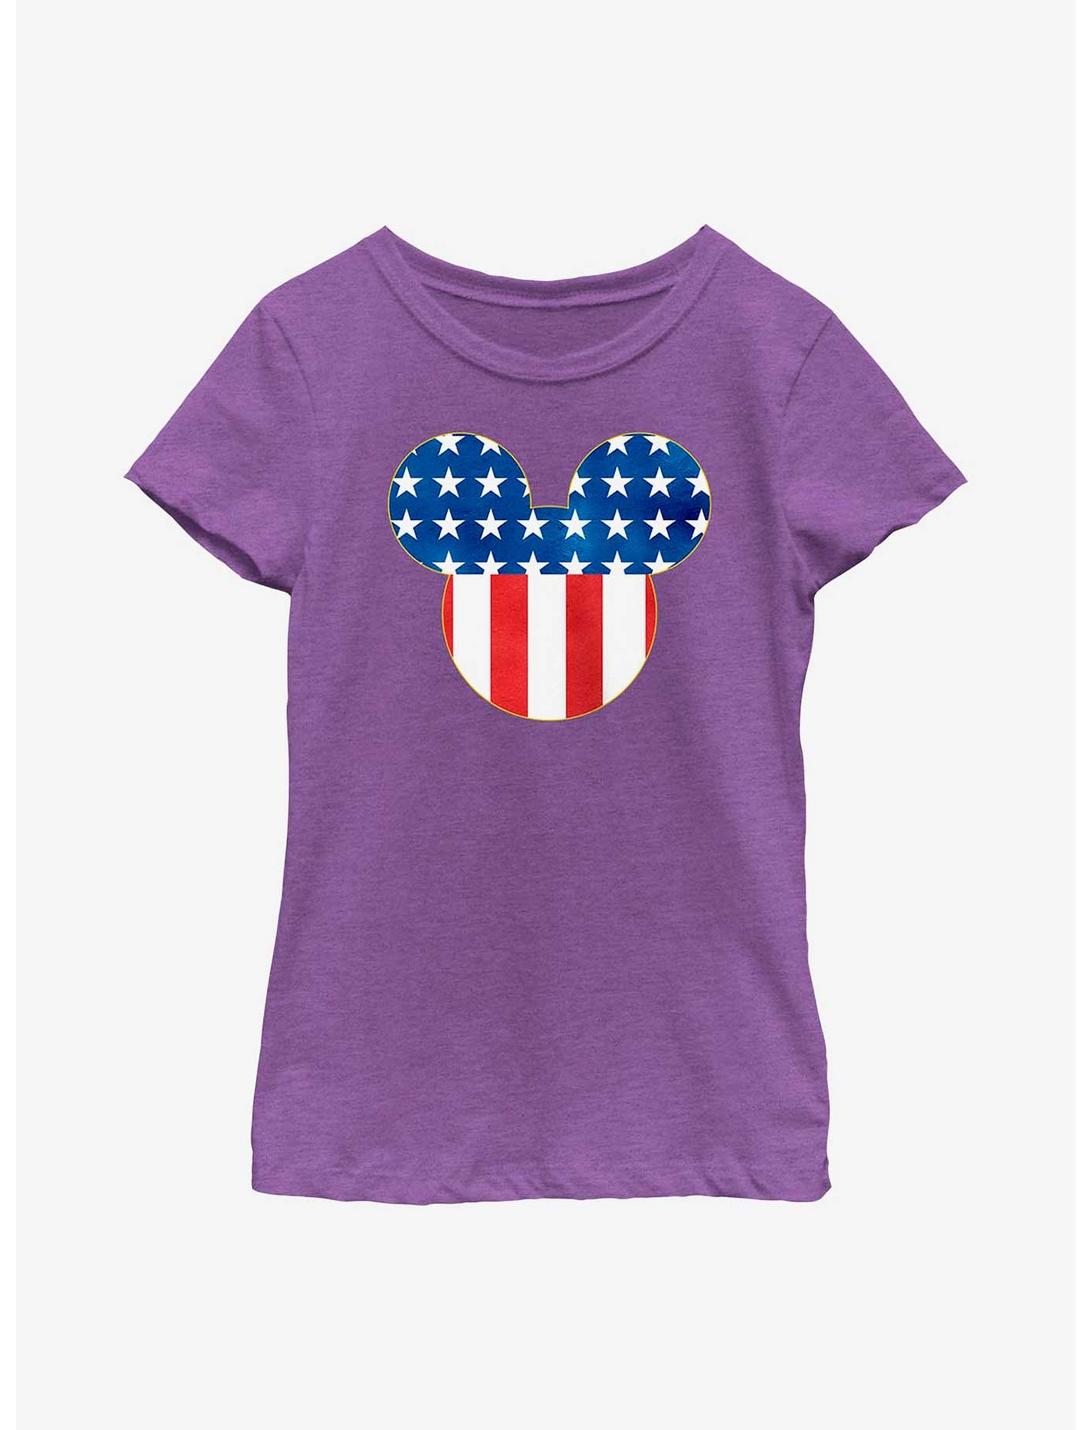 Disney Mickey Mouse Patriotic Mouse Ears Youth Girls T-Shirt, PURPLE BERRY, hi-res